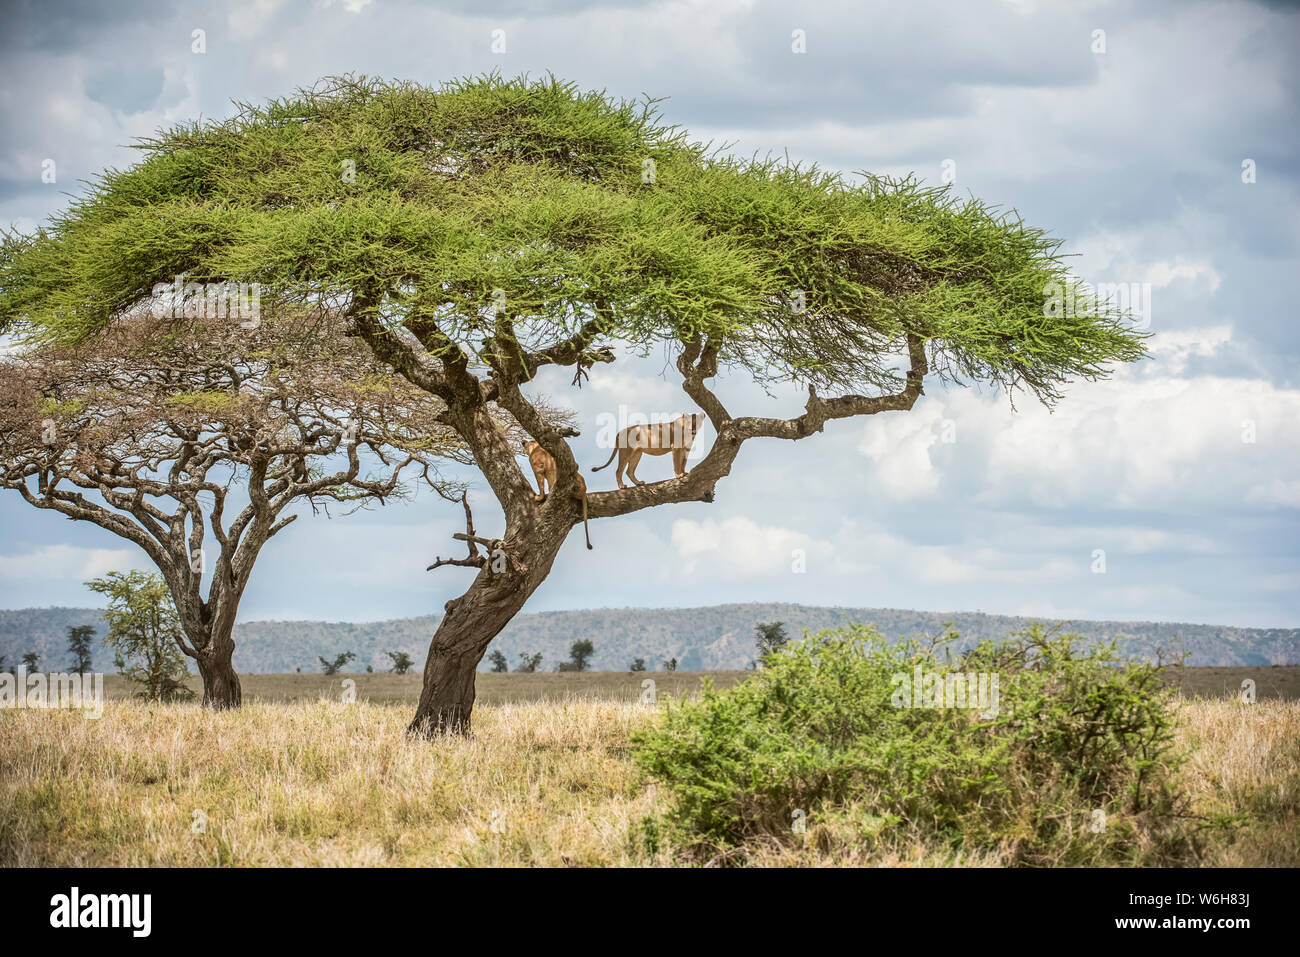 Two adult Lionesses (Panthera leo) peer down from branches of an Acacia tree in Serengeti National Park; Tanzania Stock Photo